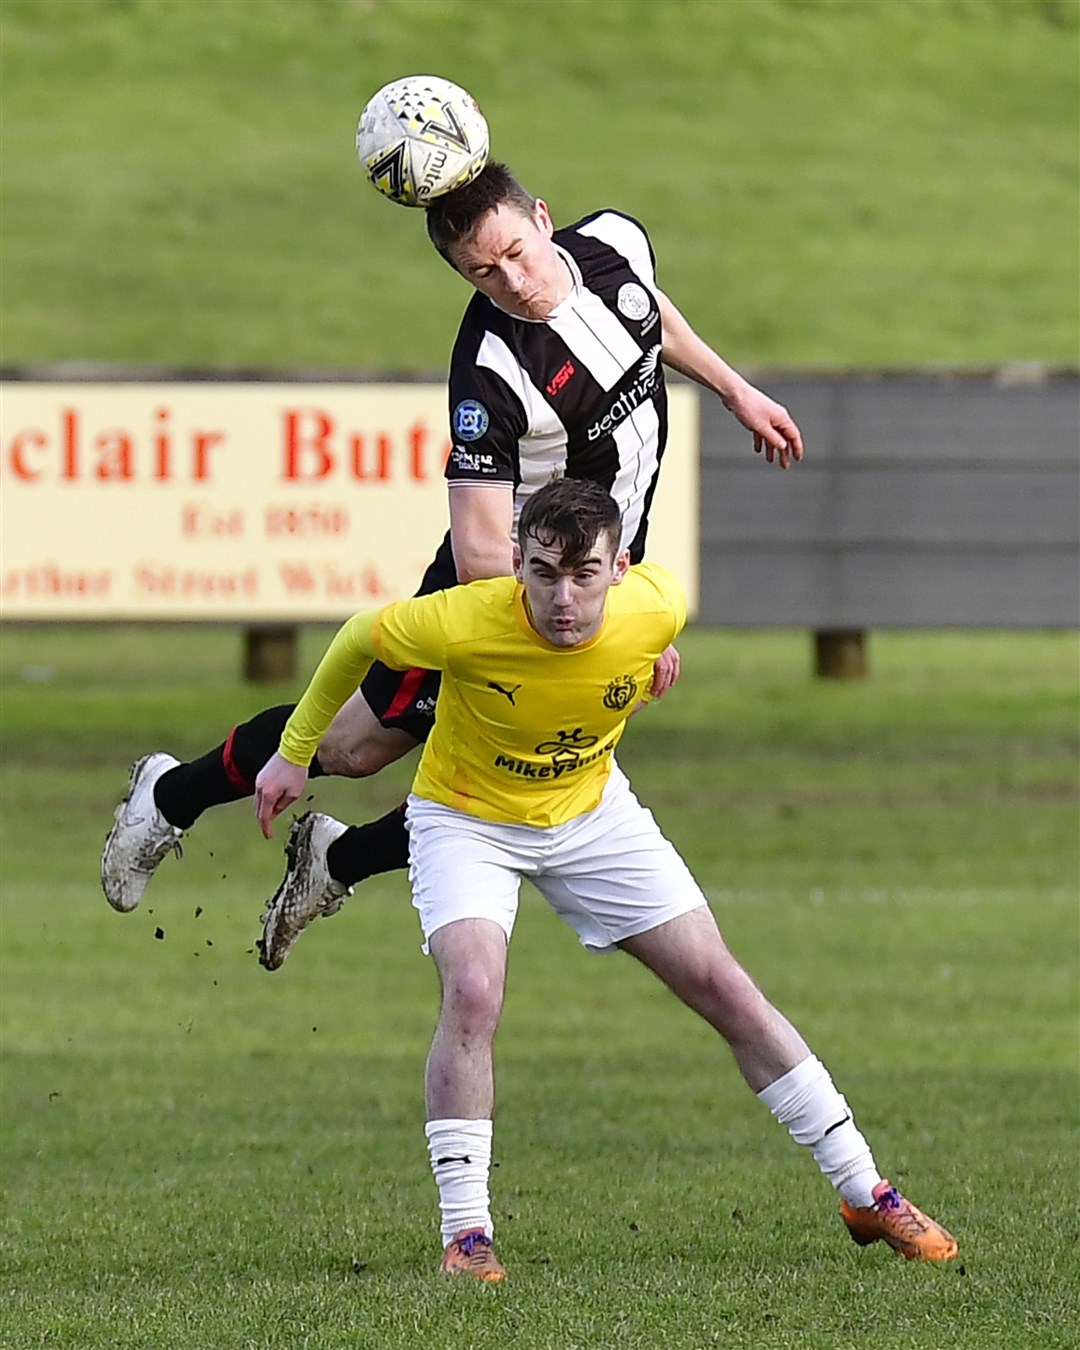 Seamus McConaghy, who has just arrived at Strathspey Thistle on loan, is challenged by Wick's Gary Manson.